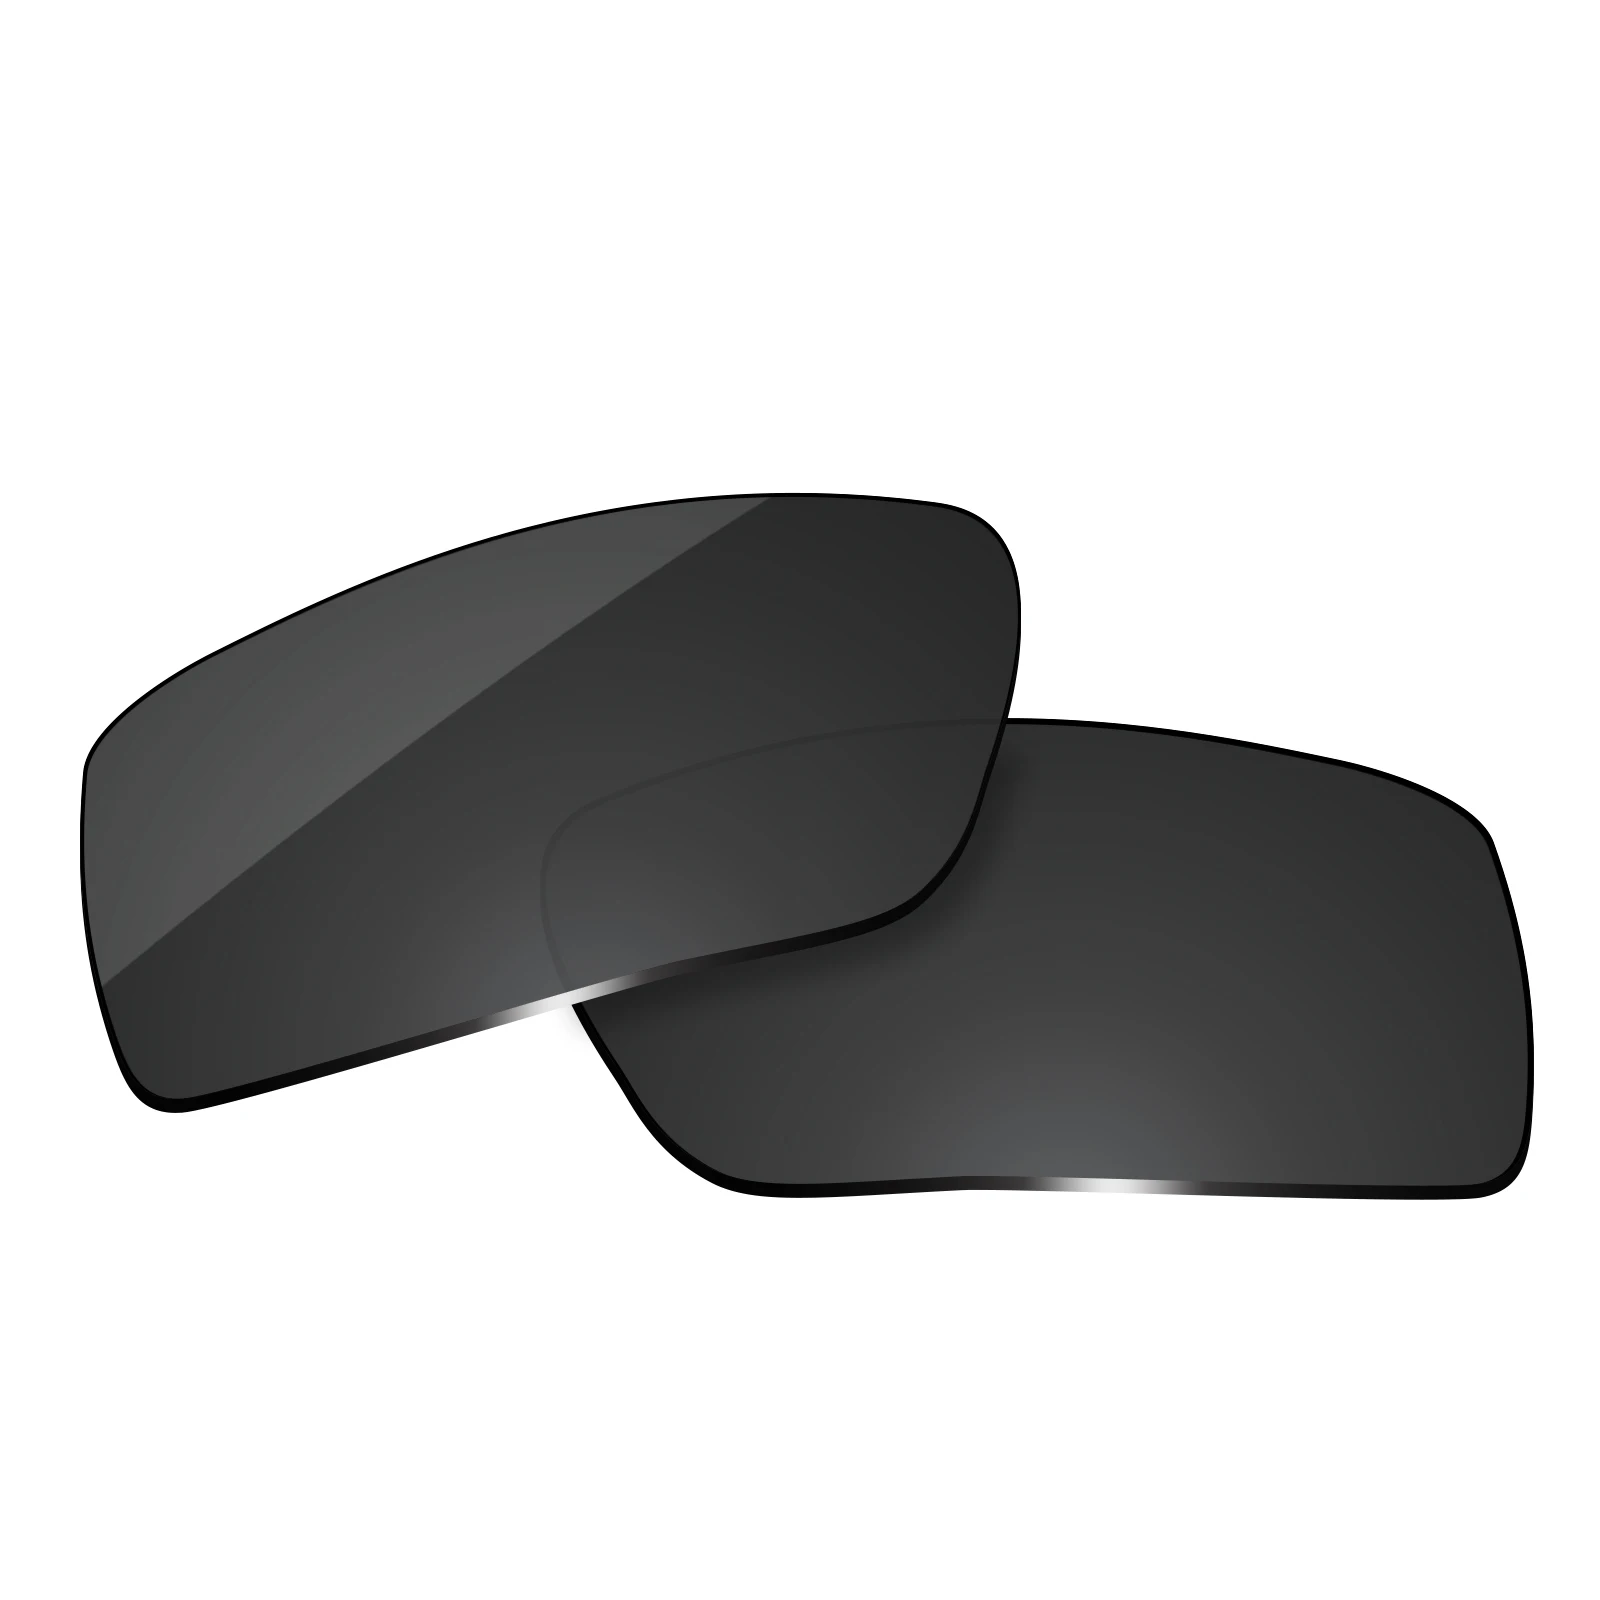 OOWLIT Polarized Replacement Lenses for-RayBan RB3498-61 Sunglasses (Lens Only)